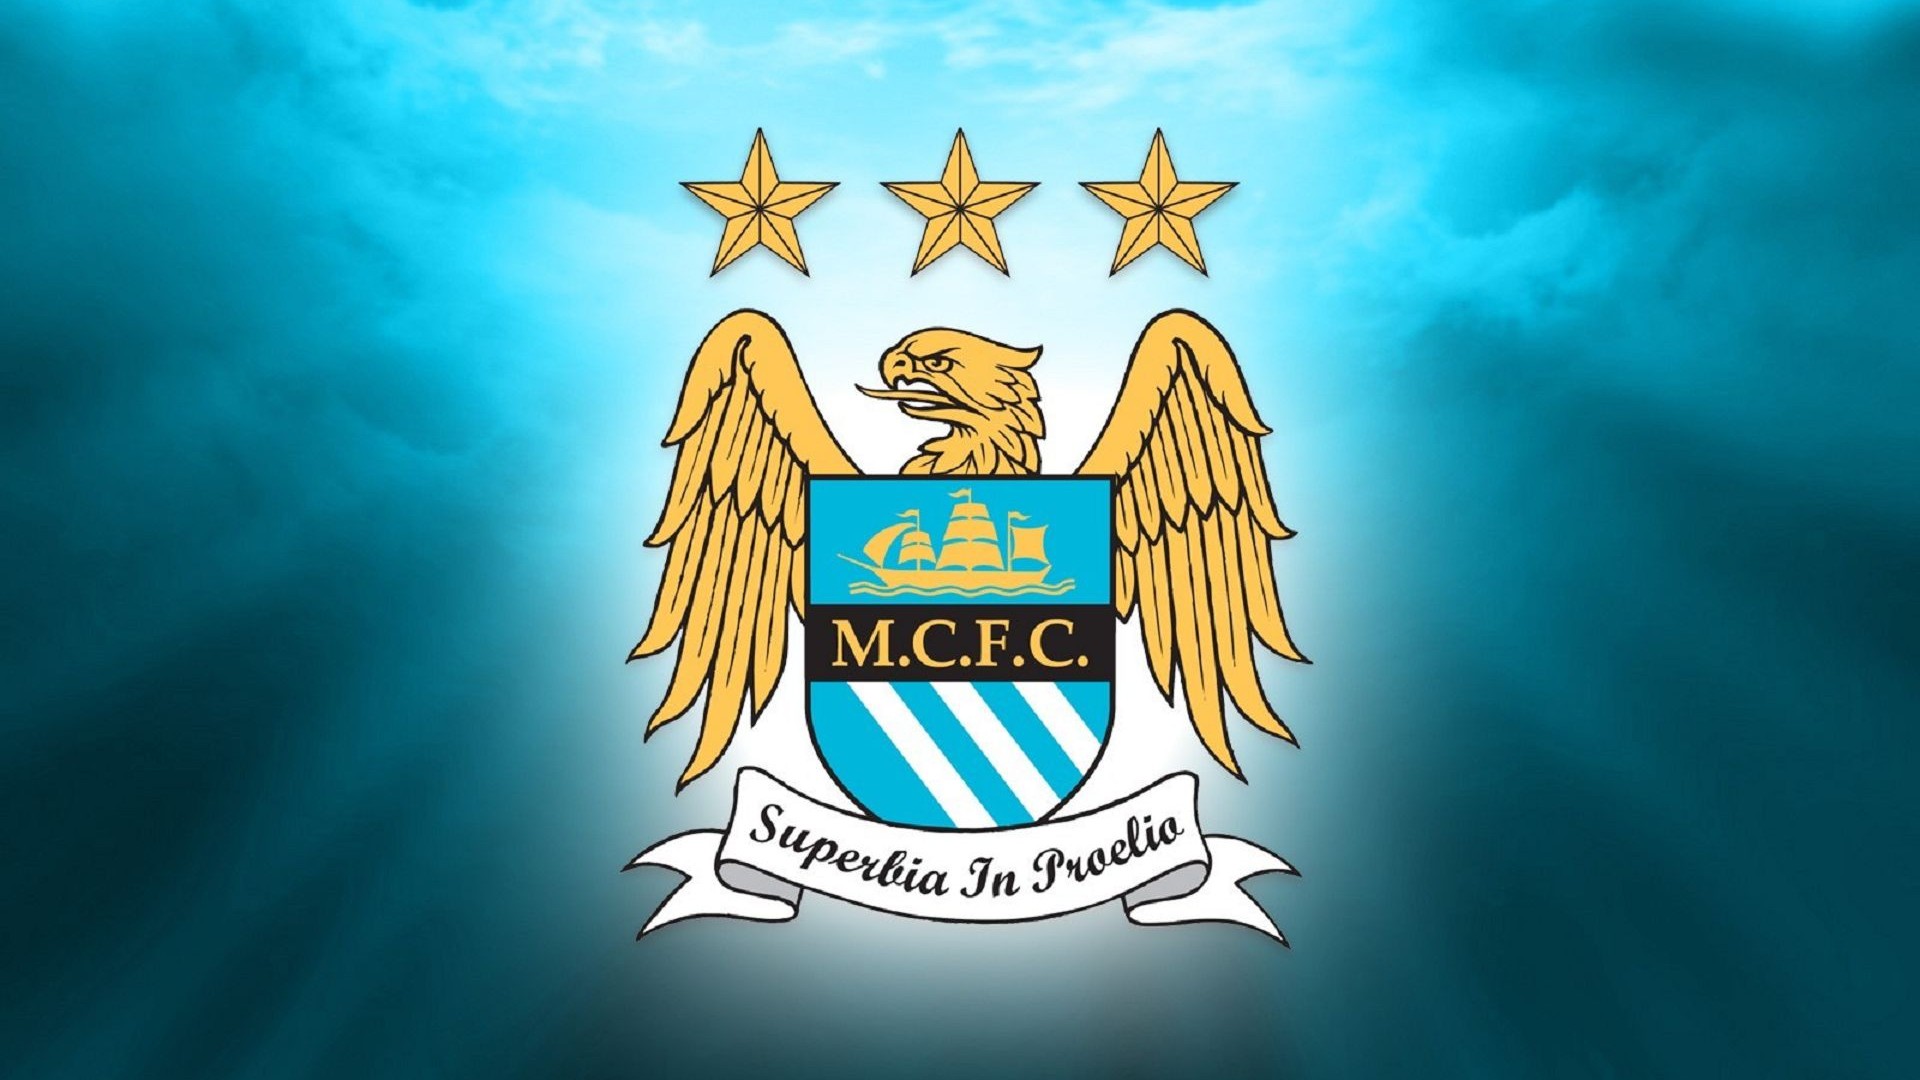 Manchester City F C Wallpaper And Windows Theme All For